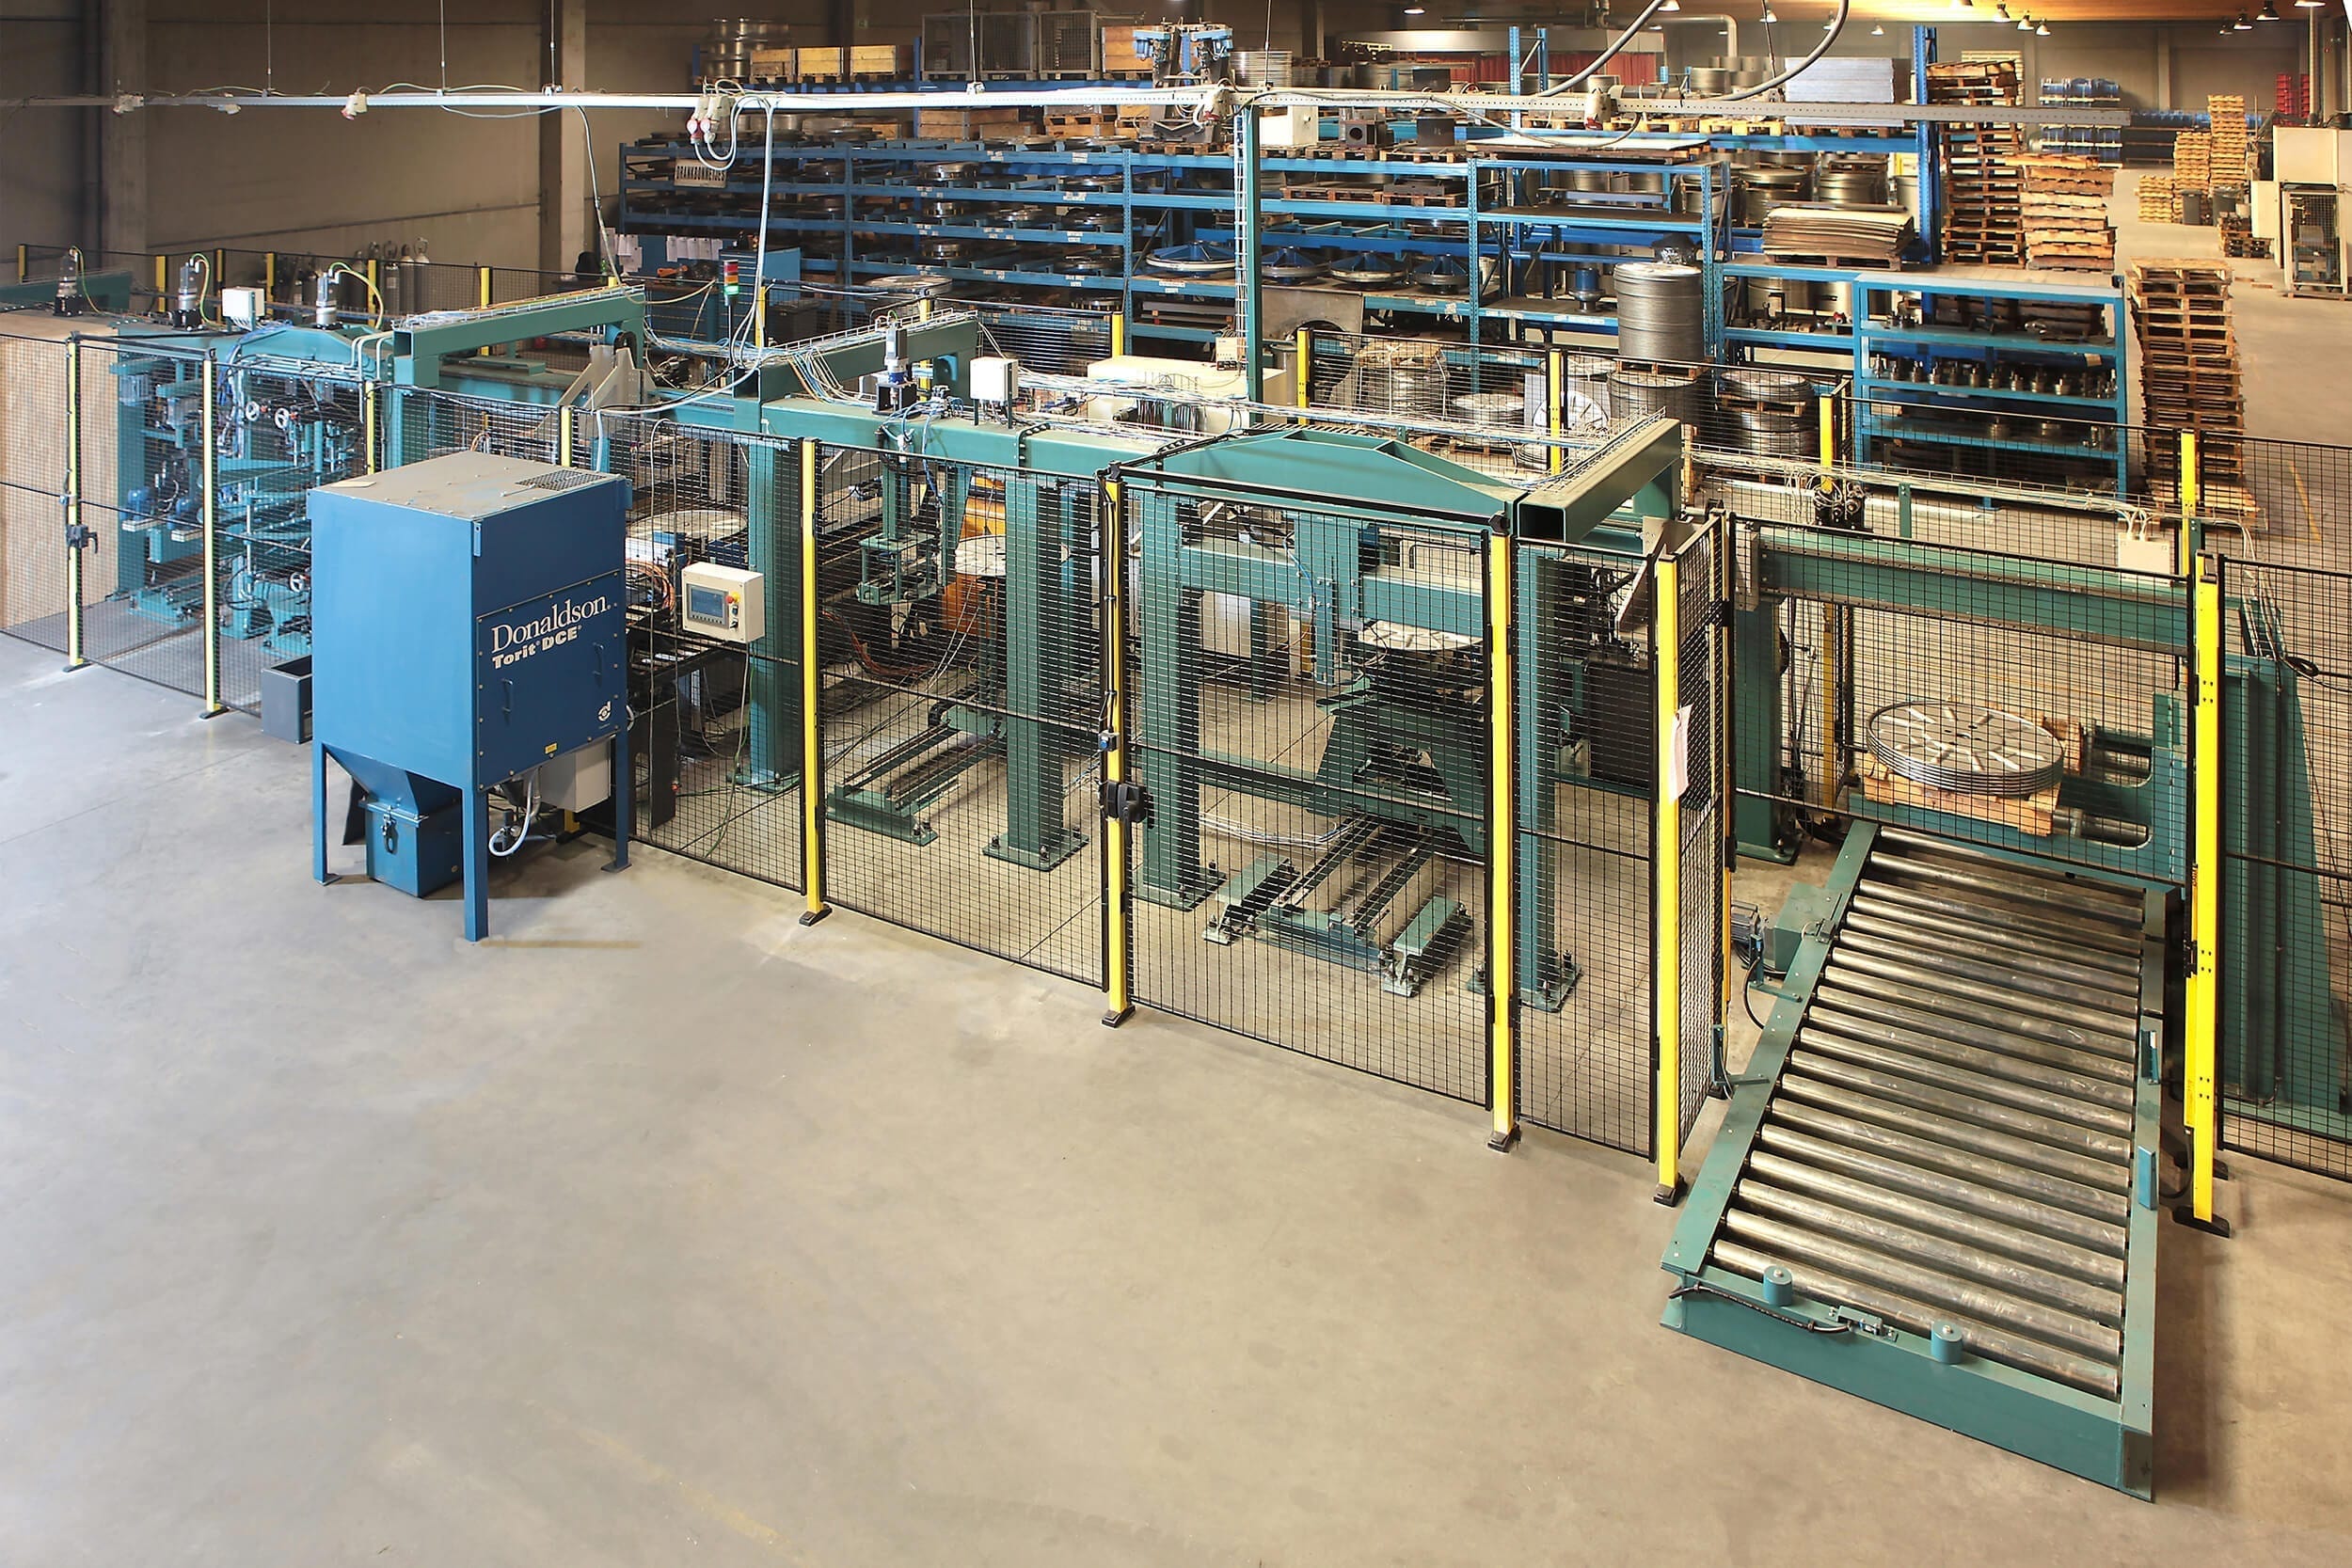 Image Astratec - Plasma cutting machines and Welding automation